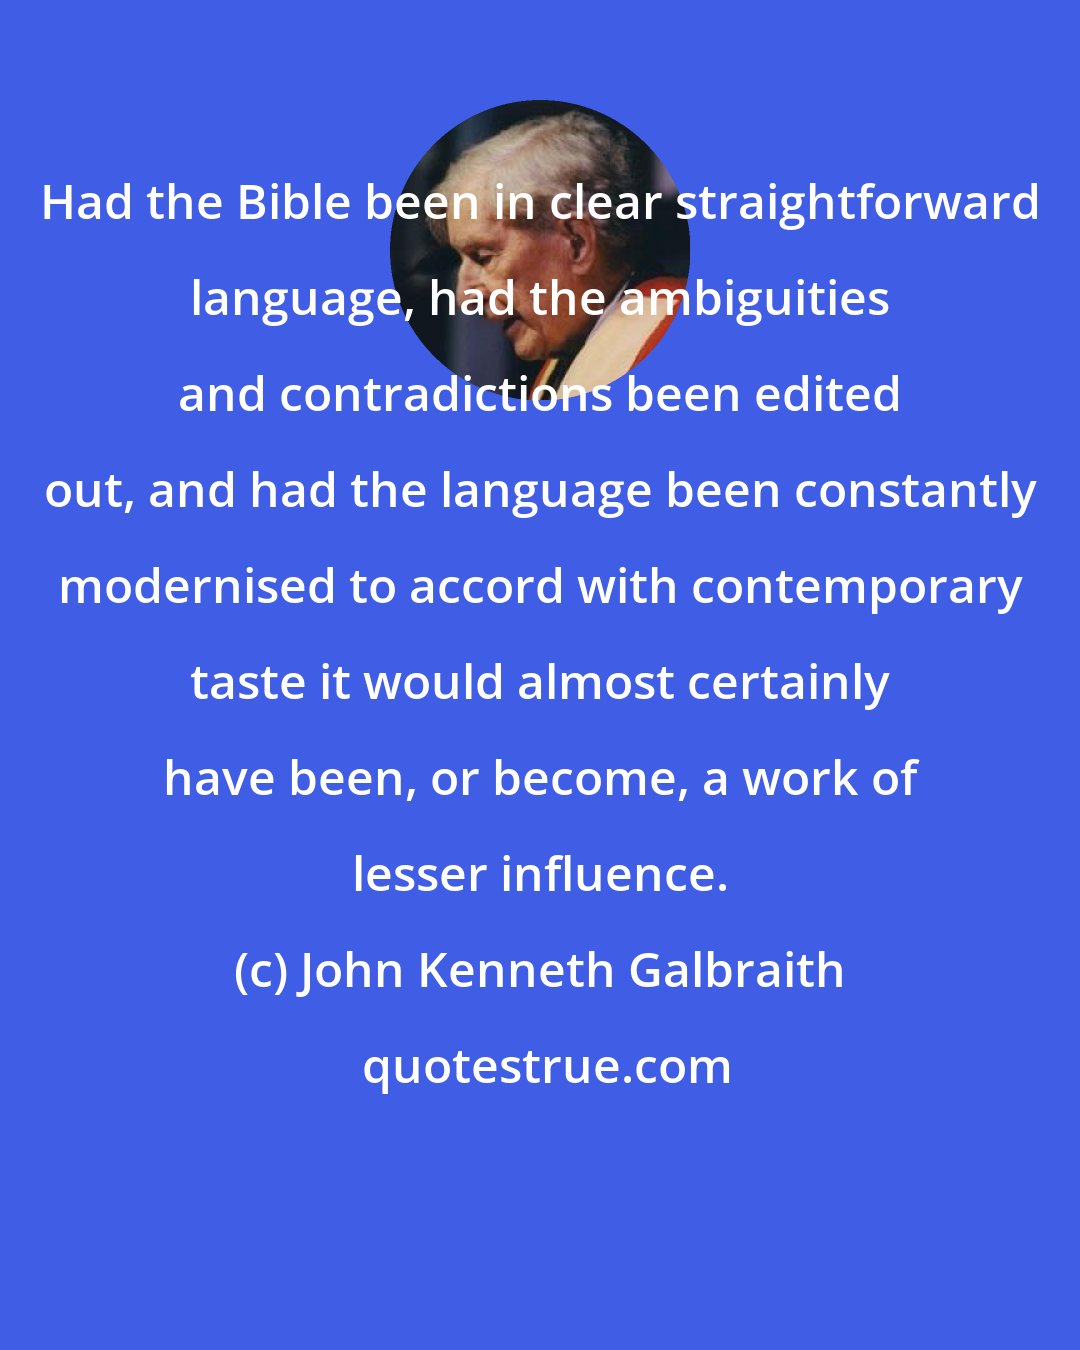 John Kenneth Galbraith: Had the Bible been in clear straightforward language, had the ambiguities and contradictions been edited out, and had the language been constantly modernised to accord with contemporary taste it would almost certainly have been, or become, a work of lesser influence.